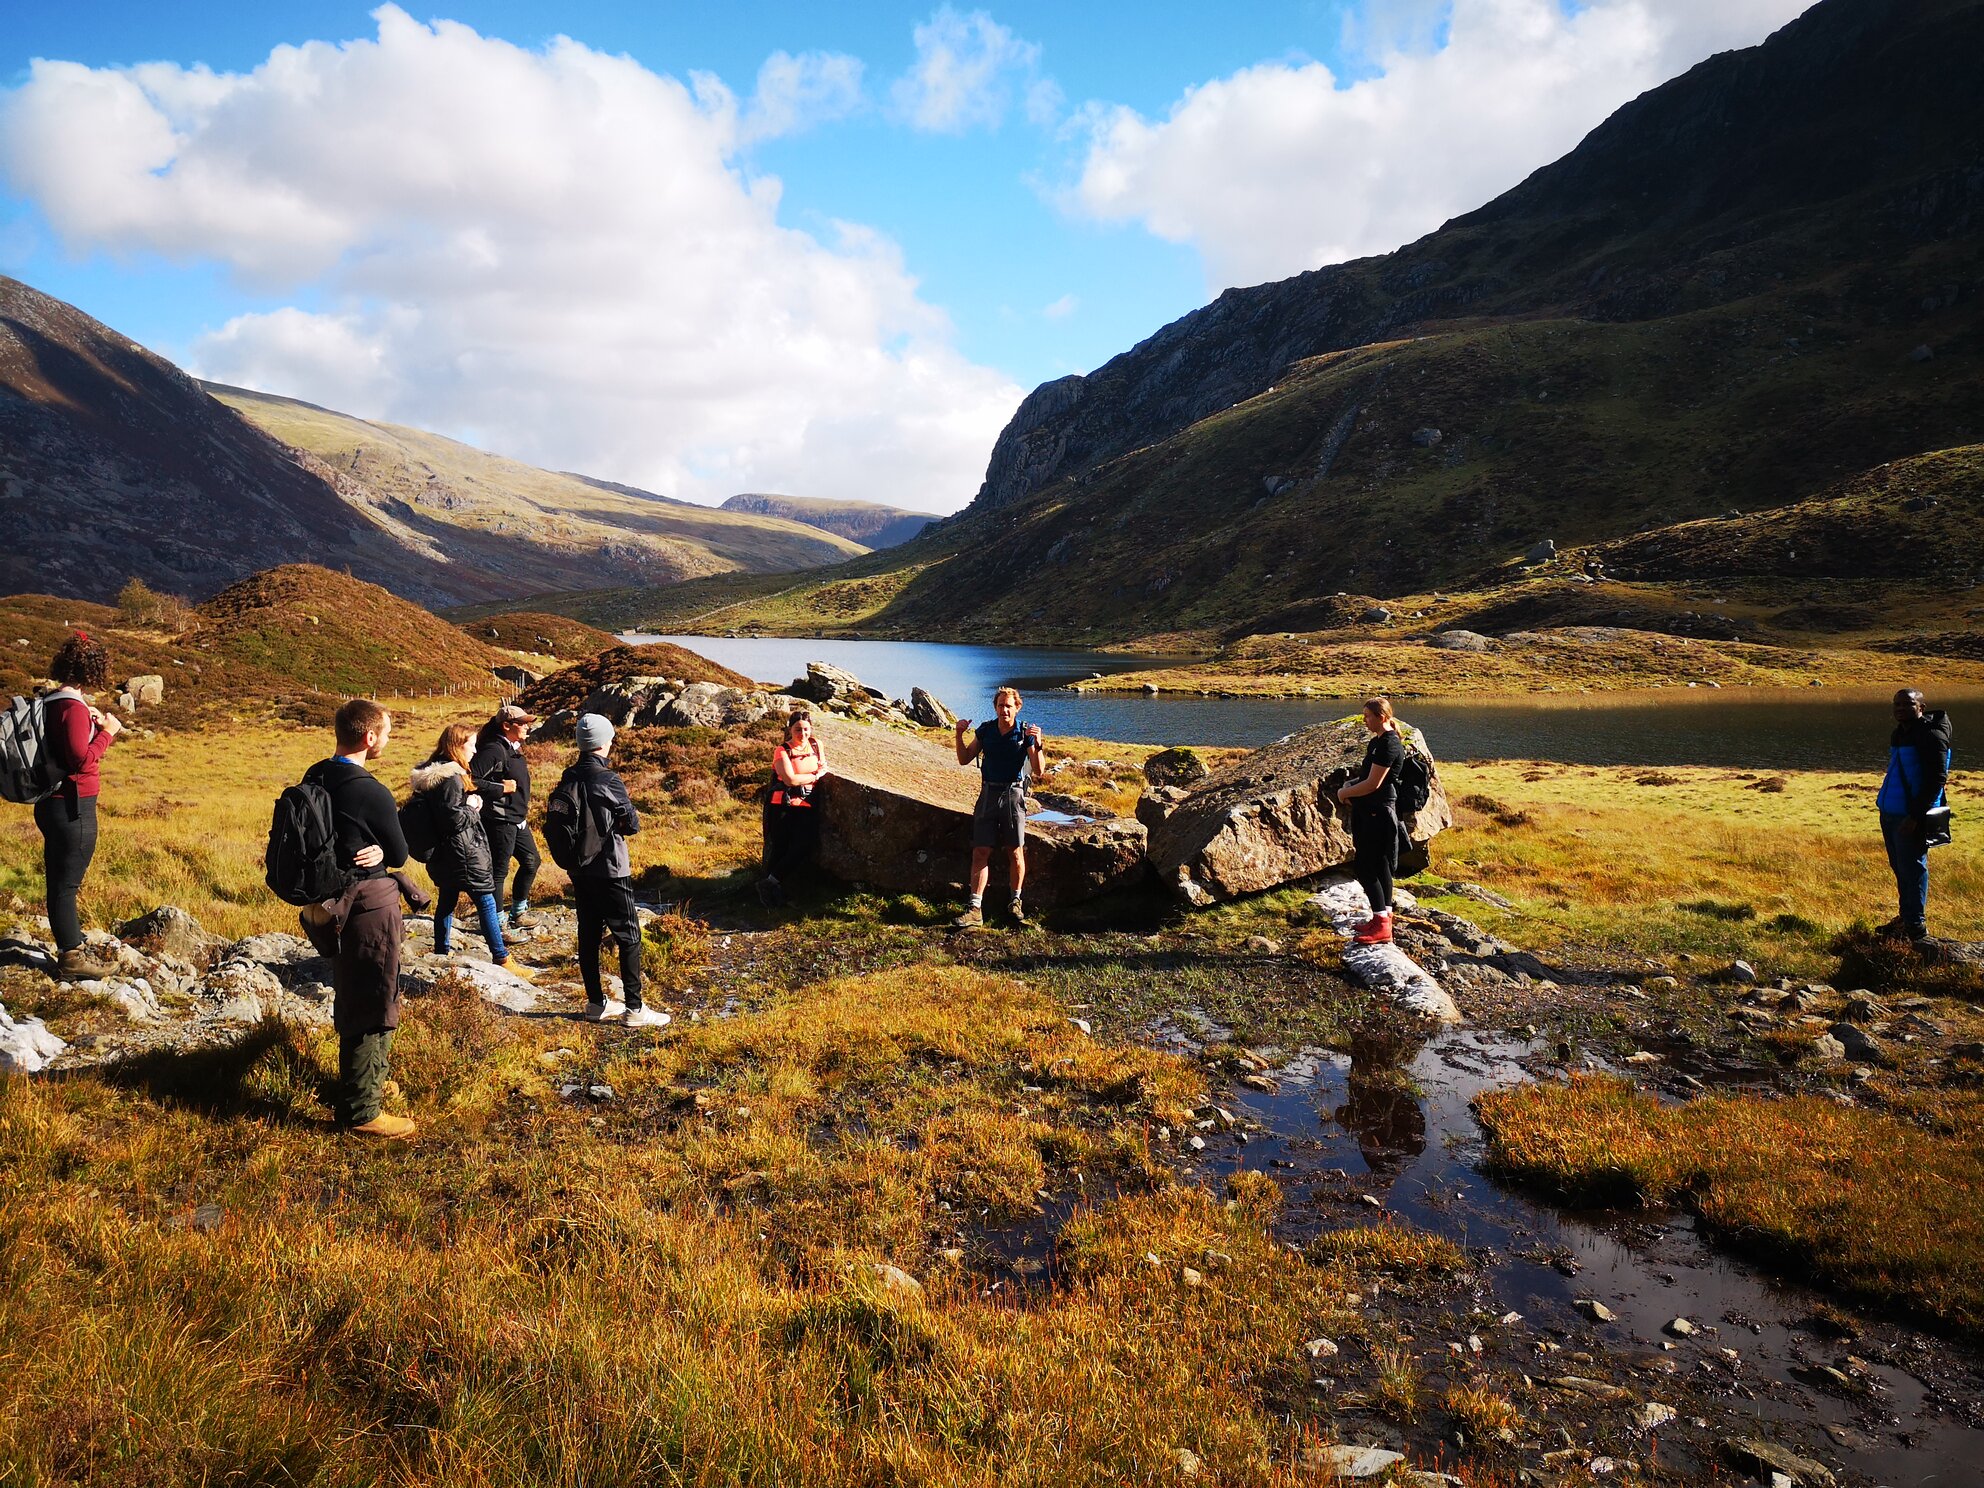 A group of students on a field trip in the mountains near a river